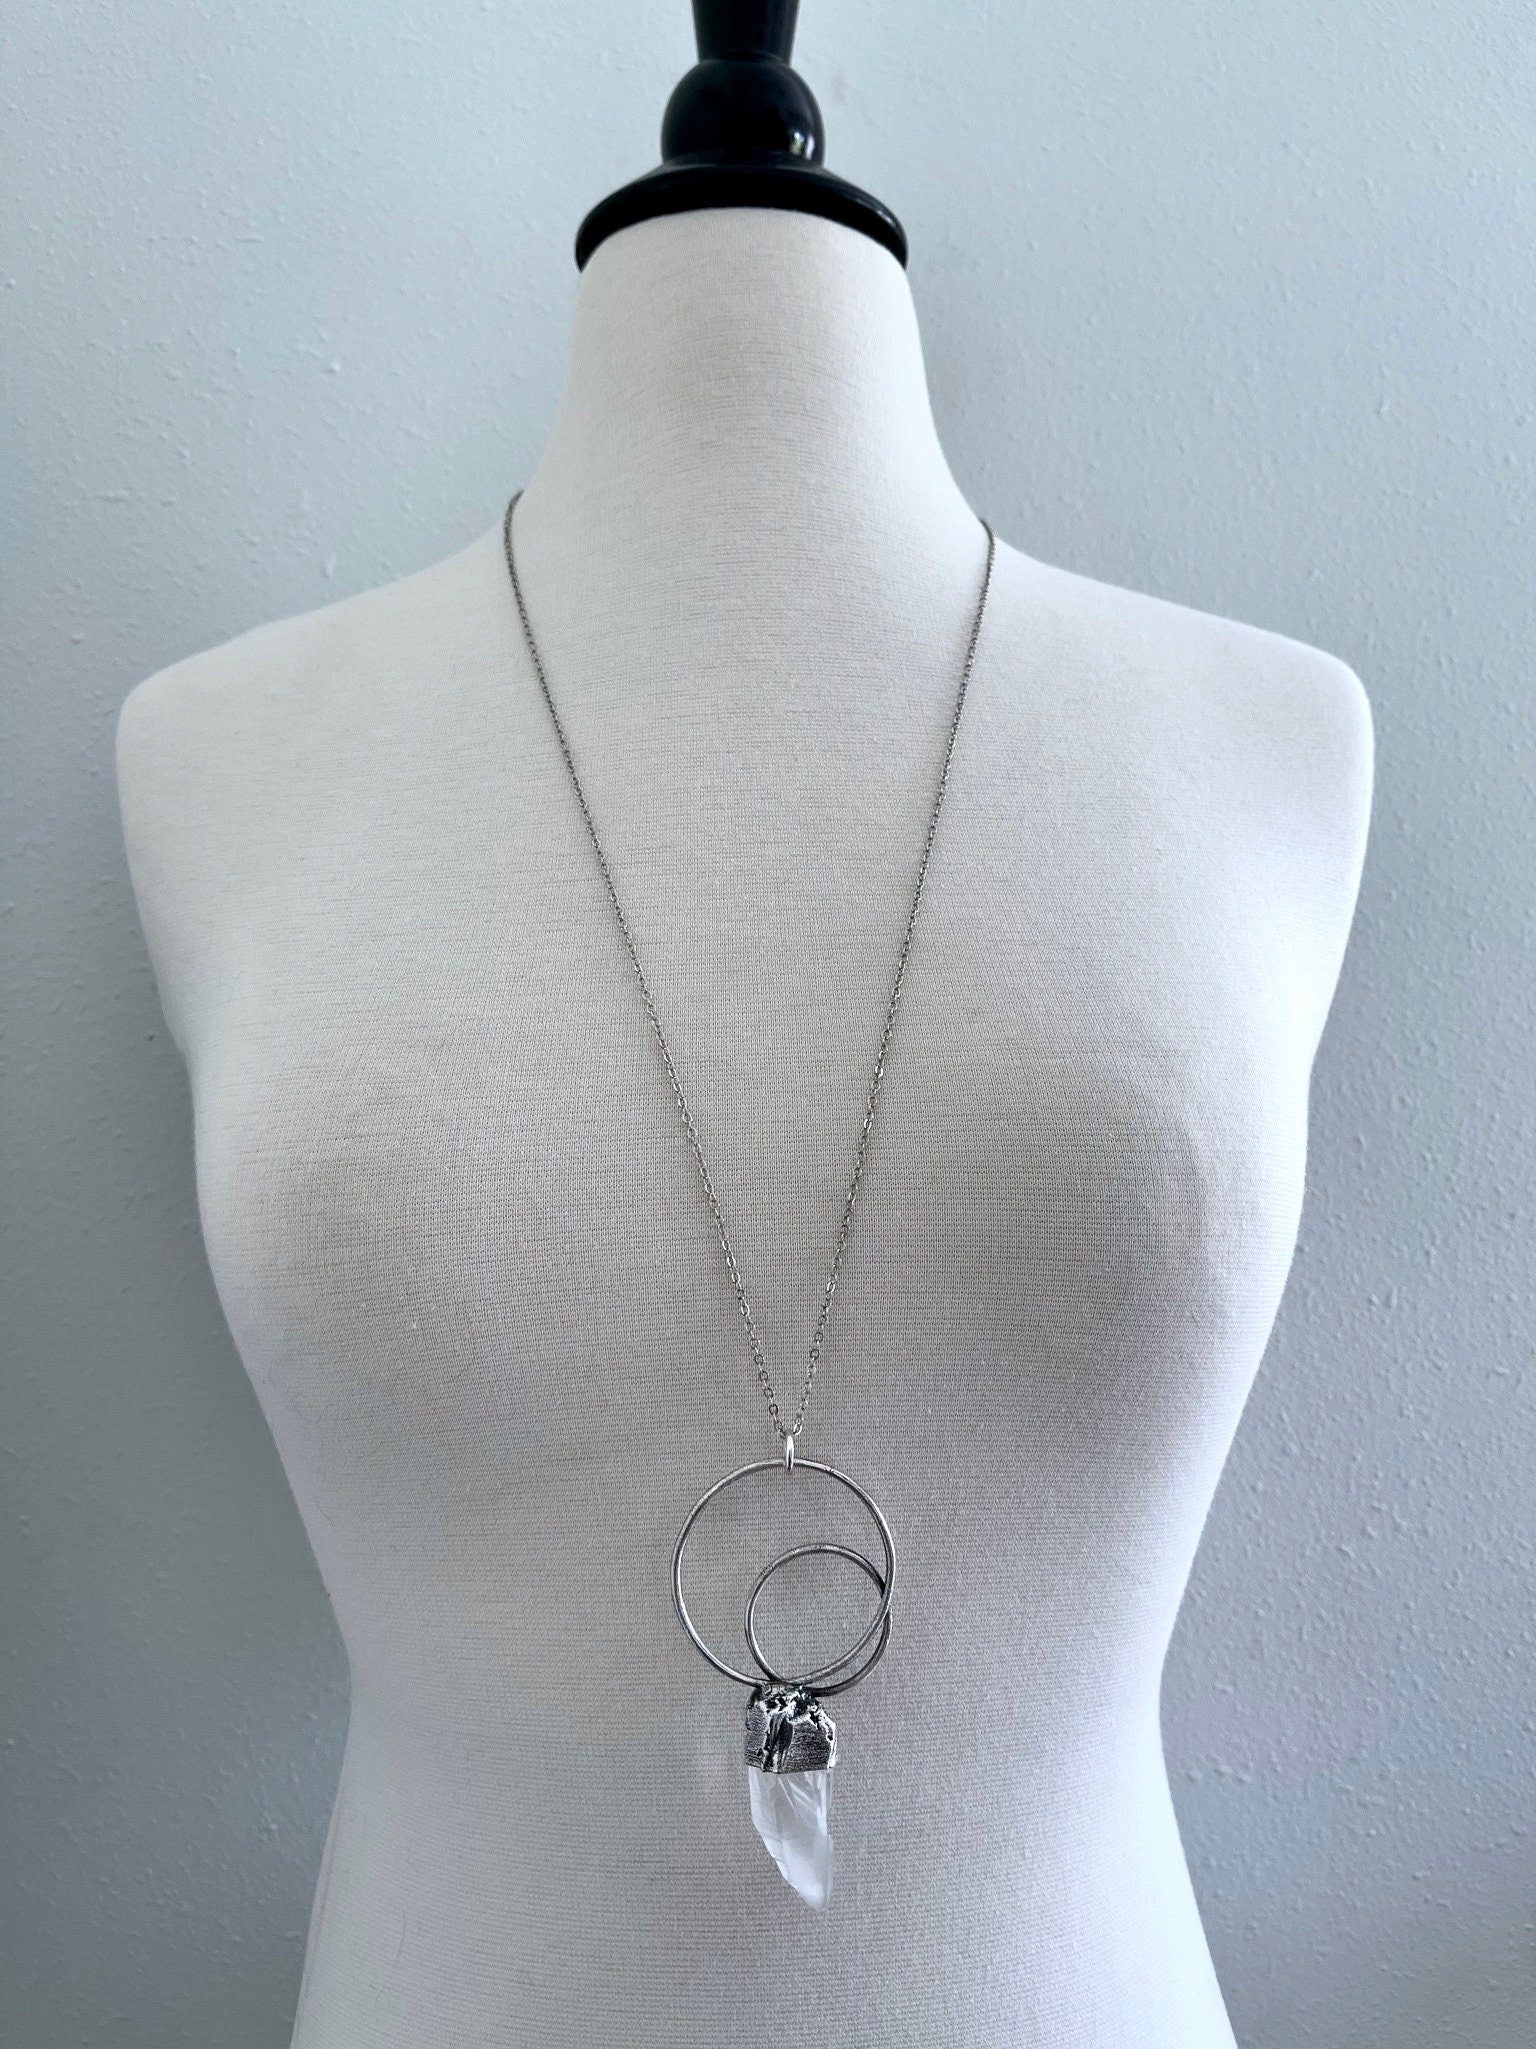 Bohemian Jewelry, Boho Crystal Jewelry, Crystal Necklaces, Etsy ID: 1053127843, FOXLARK- NECKLACES, Gift For Her, Healing Crystal, Jewelry, Necklaces, Quartz Jewelry, Quartz Necklace, Raw Clear Quartz, Raw Crystal Jewelry, Raw crystal necklace, Raw Stone